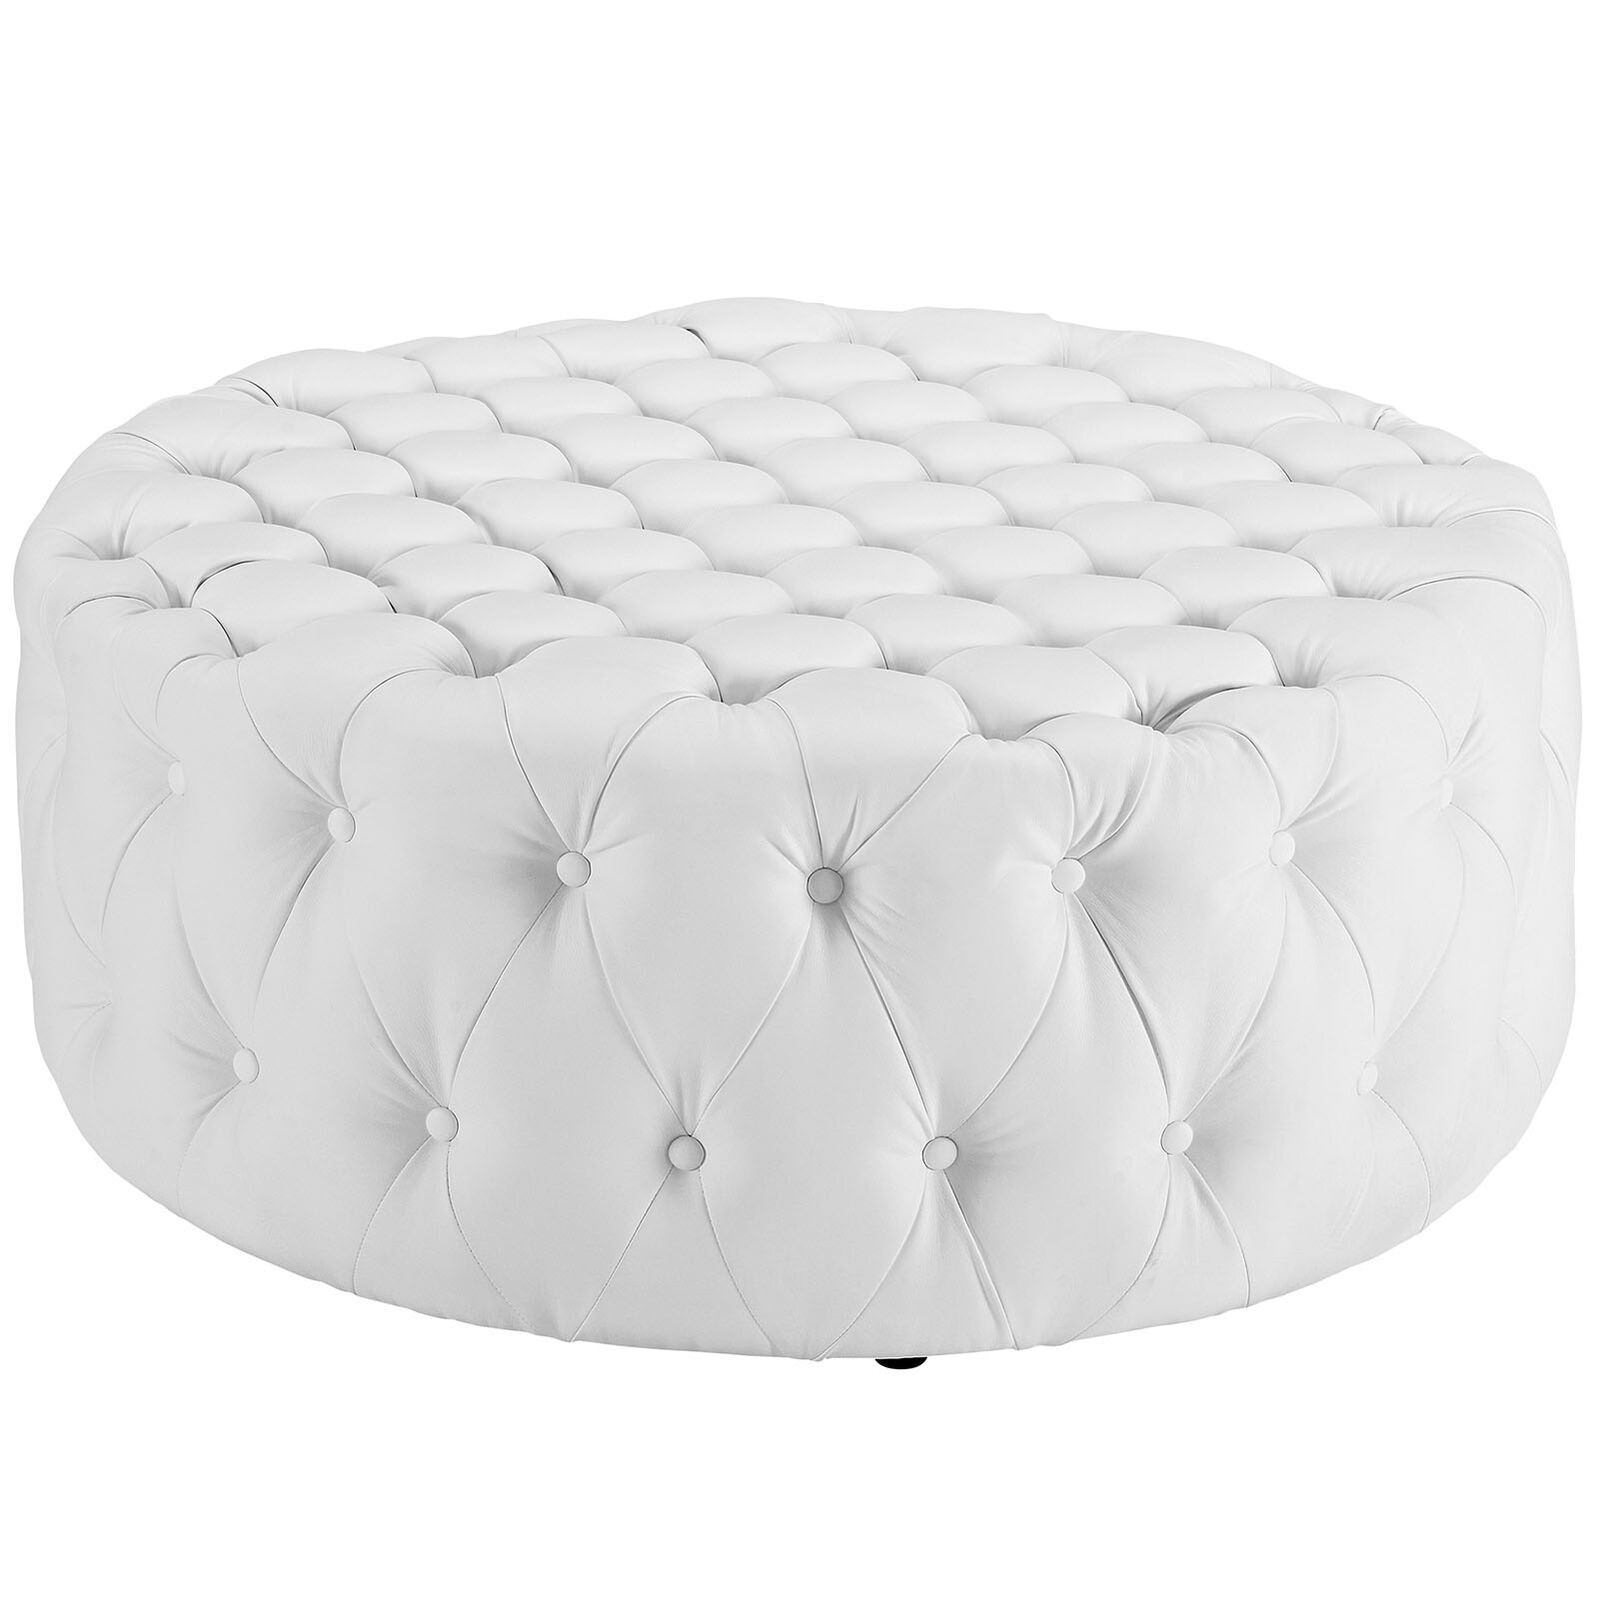 Button Tufted Faux Leather Upholstered Round Ottoman In White Regarding Round Blue Faux Leather Ottomans With Pull Tab (View 4 of 20)